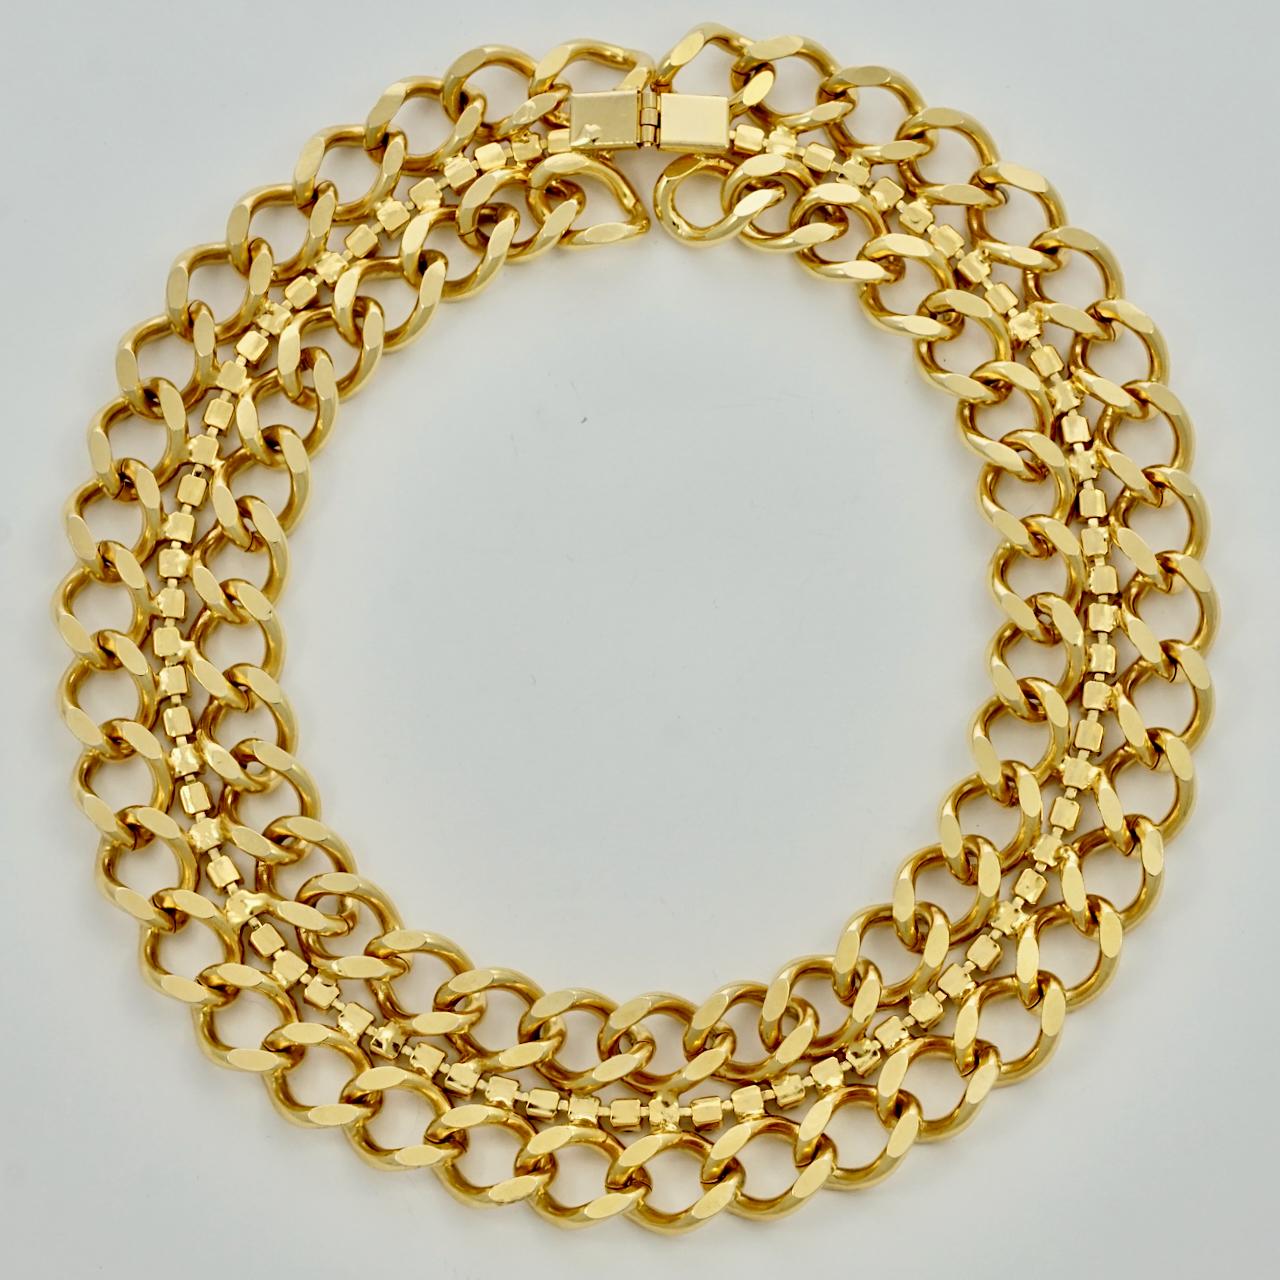 Gold Plated Curb Link Chain Collar Necklace with Rhinestones circa 1980s For Sale 2